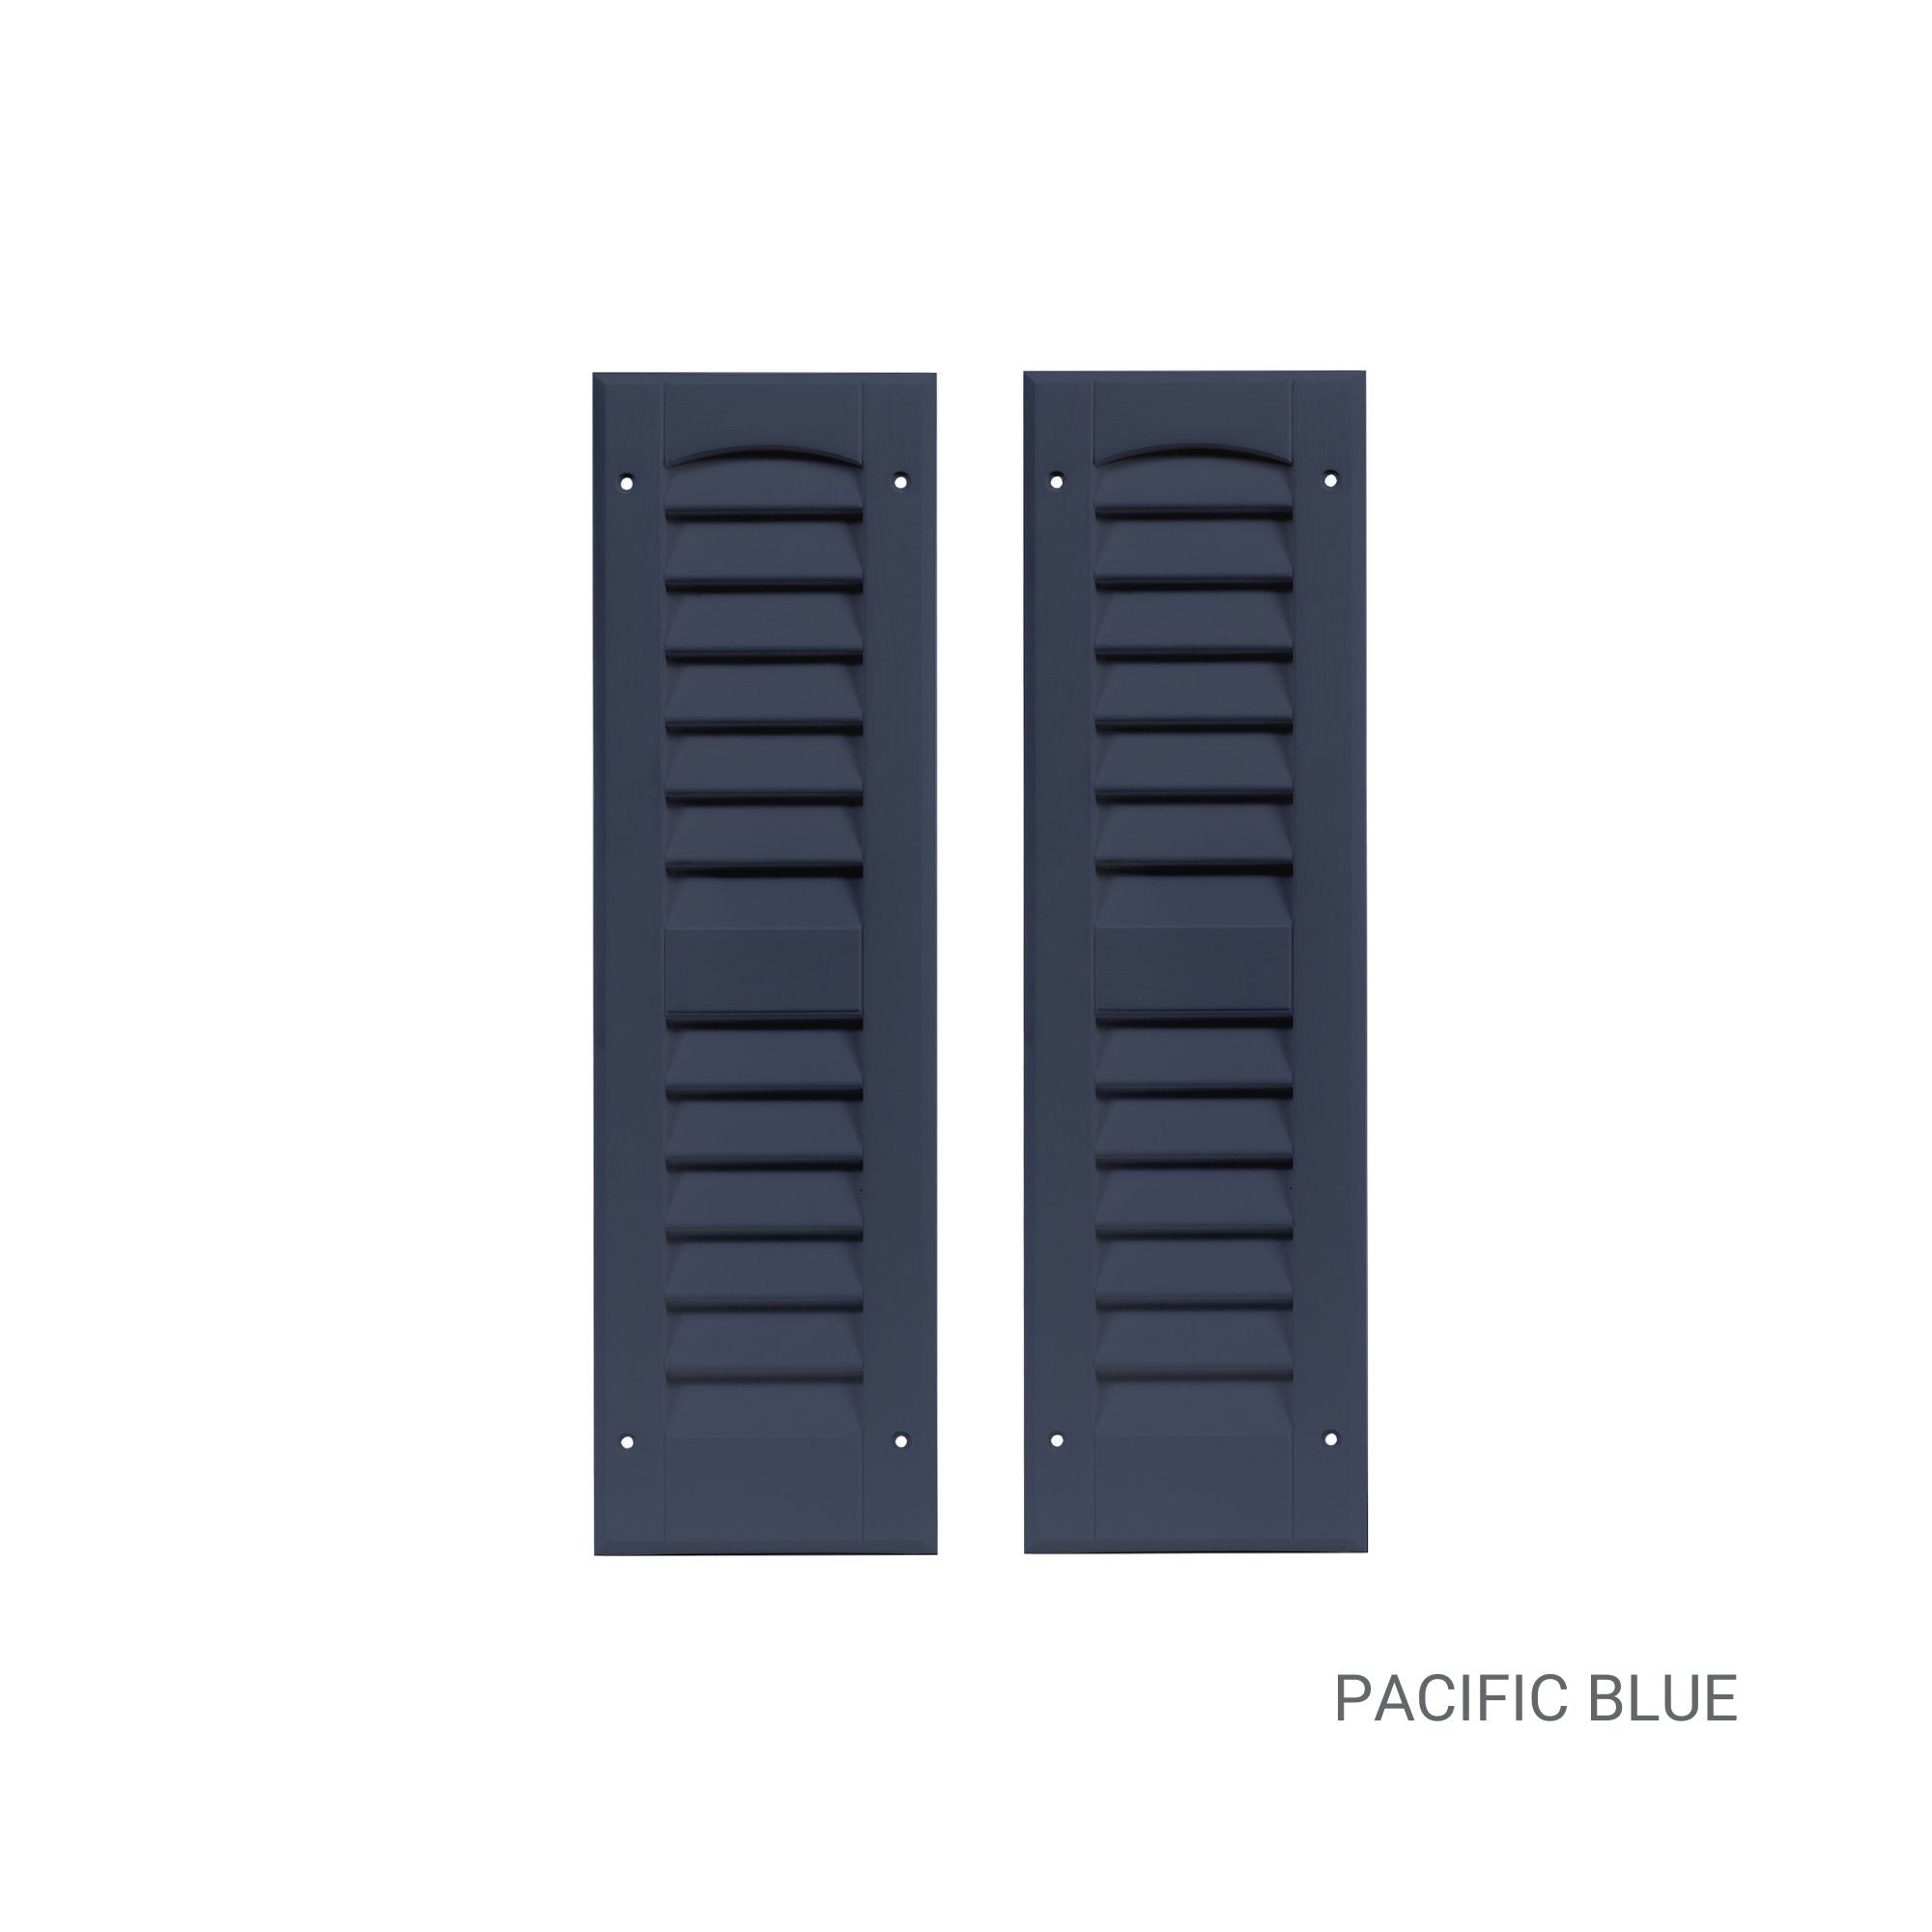 Pair of 6" W x 21" H Louvered Pacific Blue Shutters for Sheds, Playhouses, and MORE